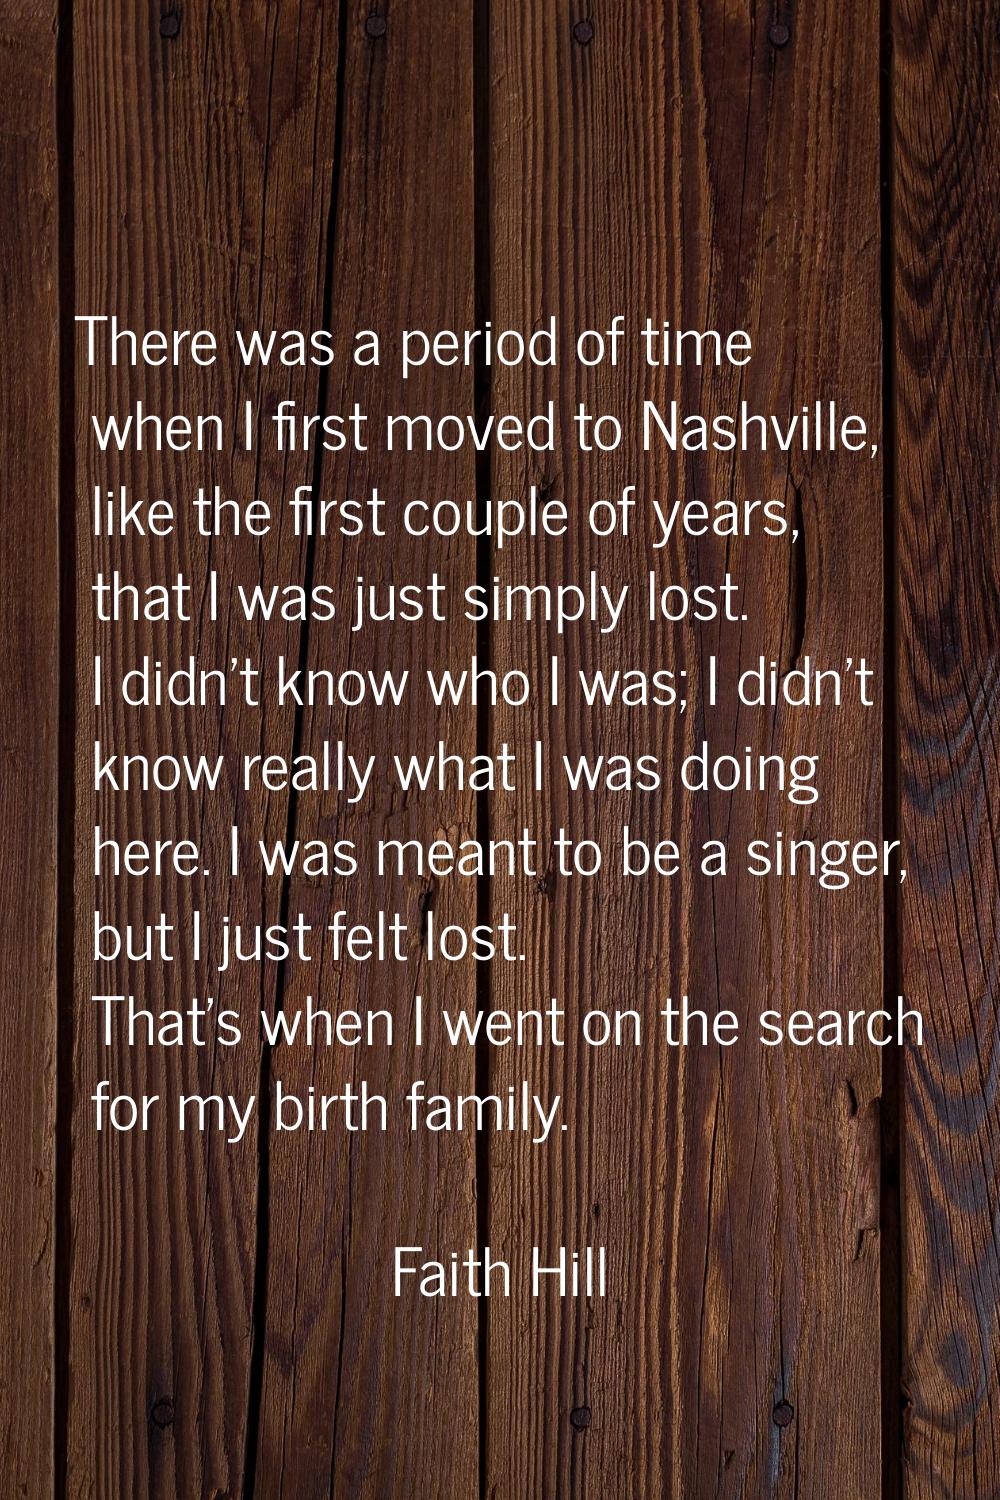 There was a period of time when I first moved to Nashville, like the first couple of years, that I 